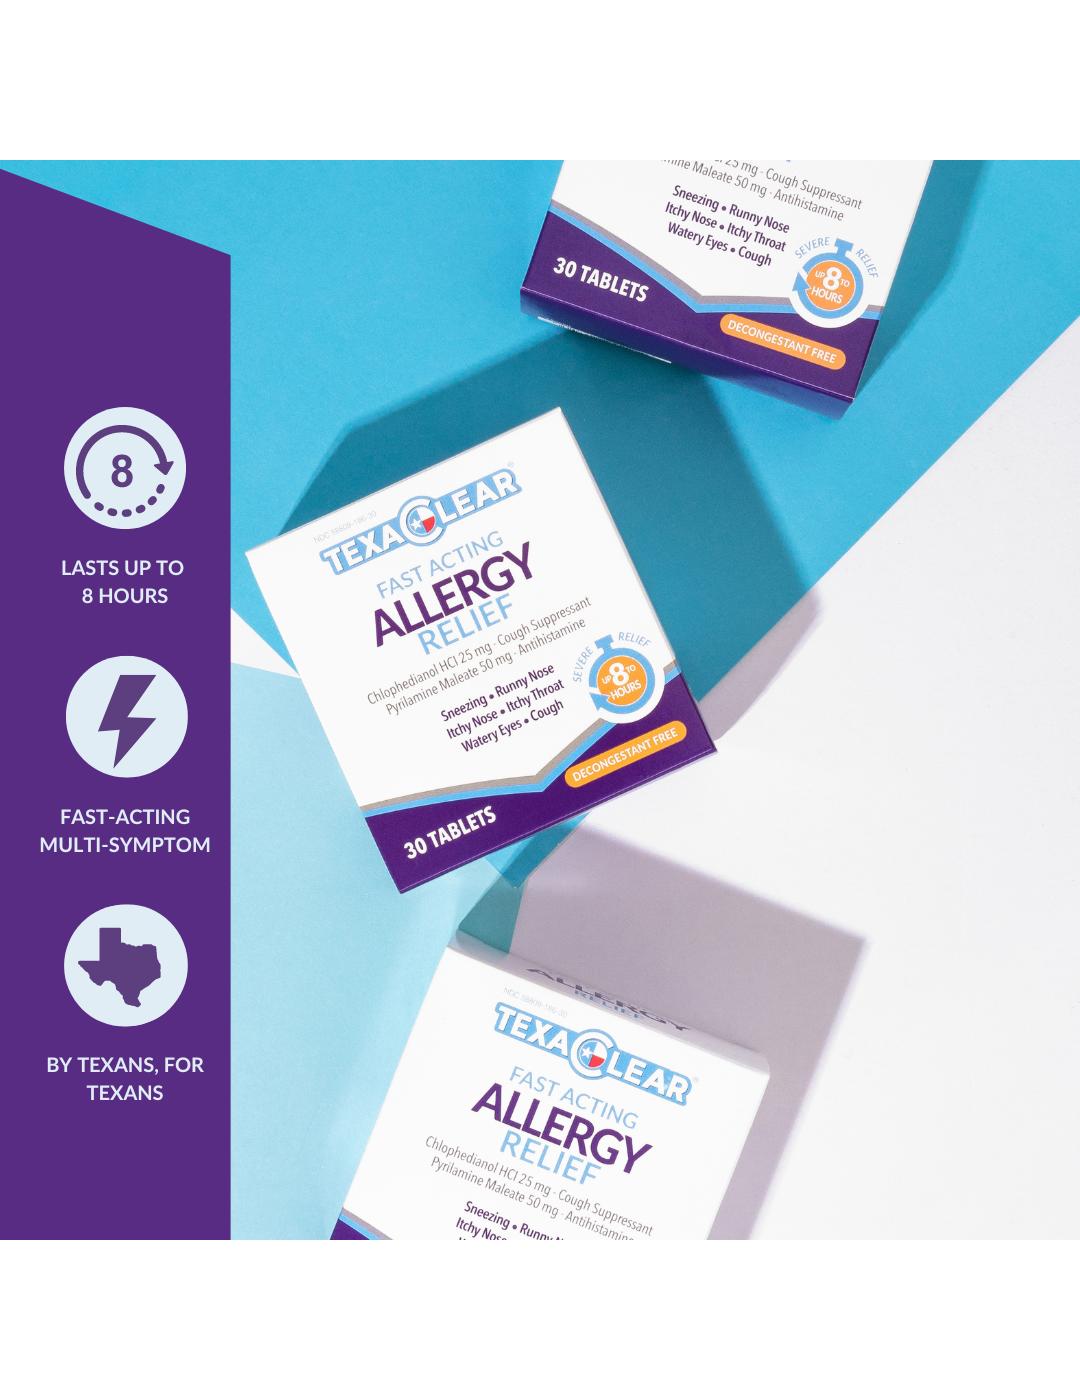 TexaClear Allergy Relief Tablets; image 3 of 6